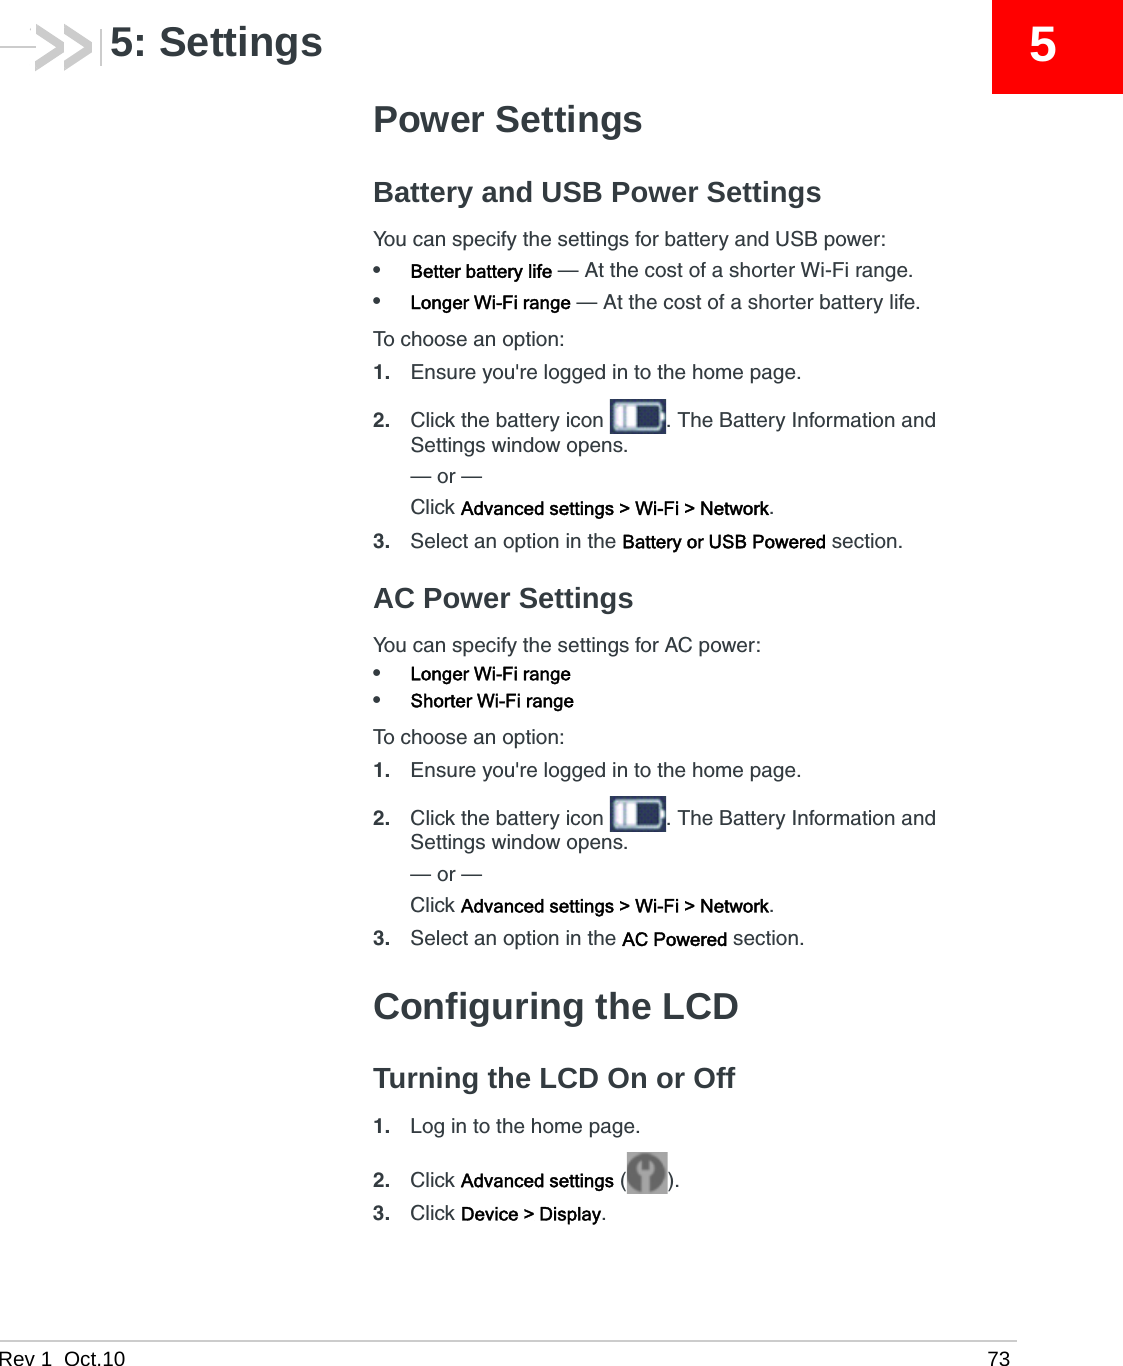 Rev 1  Oct.10 7355: SettingsPower SettingsBattery and USB Power SettingsYou can specify the settings for battery and USB power:•Better battery life — At the cost of a shorter Wi-Fi range. •Longer Wi-Fi range — At the cost of a shorter battery life.To choose an option:1. Ensure you&apos;re logged in to the home page.2. Click the battery icon  . The Battery Information and Settings window opens.— or —Click Advanced settings &gt; Wi-Fi &gt; Network.3. Select an option in the Battery or USB Powered section.AC Power SettingsYou can specify the settings for AC power:•Longer Wi-Fi range•Shorter Wi-Fi rangeTo choose an option:1. Ensure you&apos;re logged in to the home page.2. Click the battery icon  . The Battery Information and Settings window opens.— or —Click Advanced settings &gt; Wi-Fi &gt; Network.3. Select an option in the AC Powered section.Configuring the LCDTurning the LCD On or Off1. Log in to the home page.2. Click Advanced settings ().3. Click Device &gt; Display.